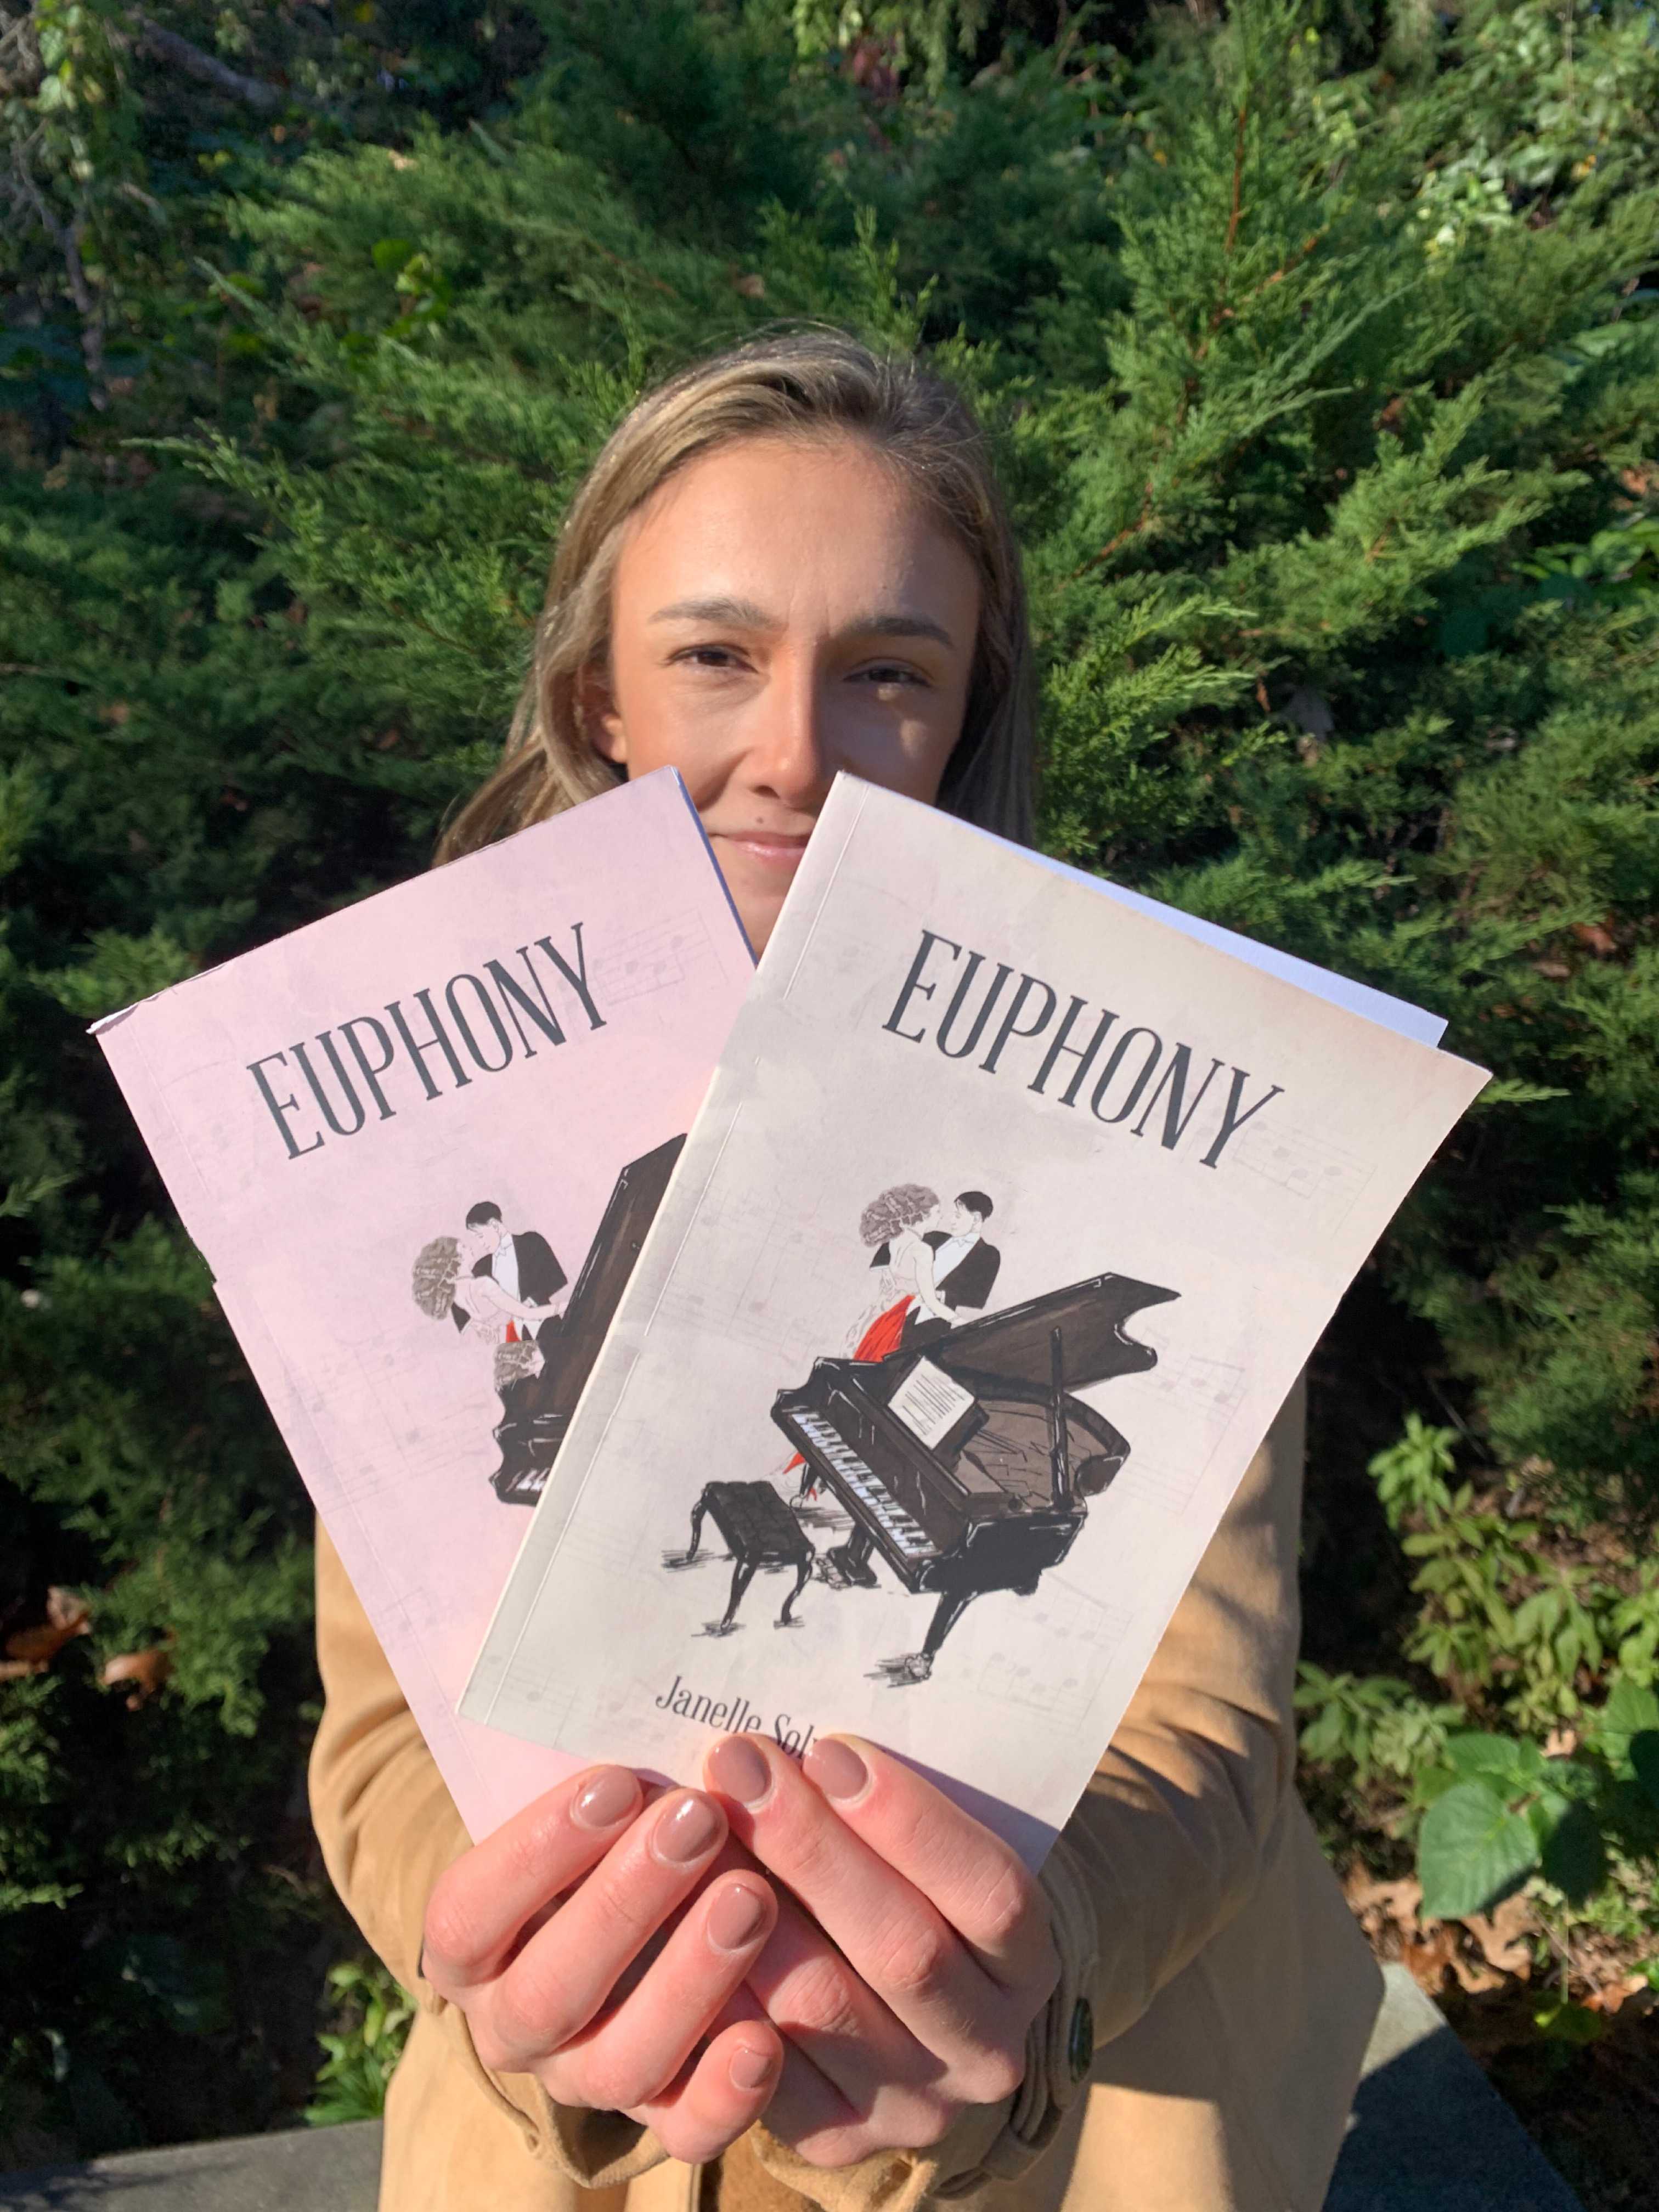 janelle solviletti holding two copies of euphony poetry book